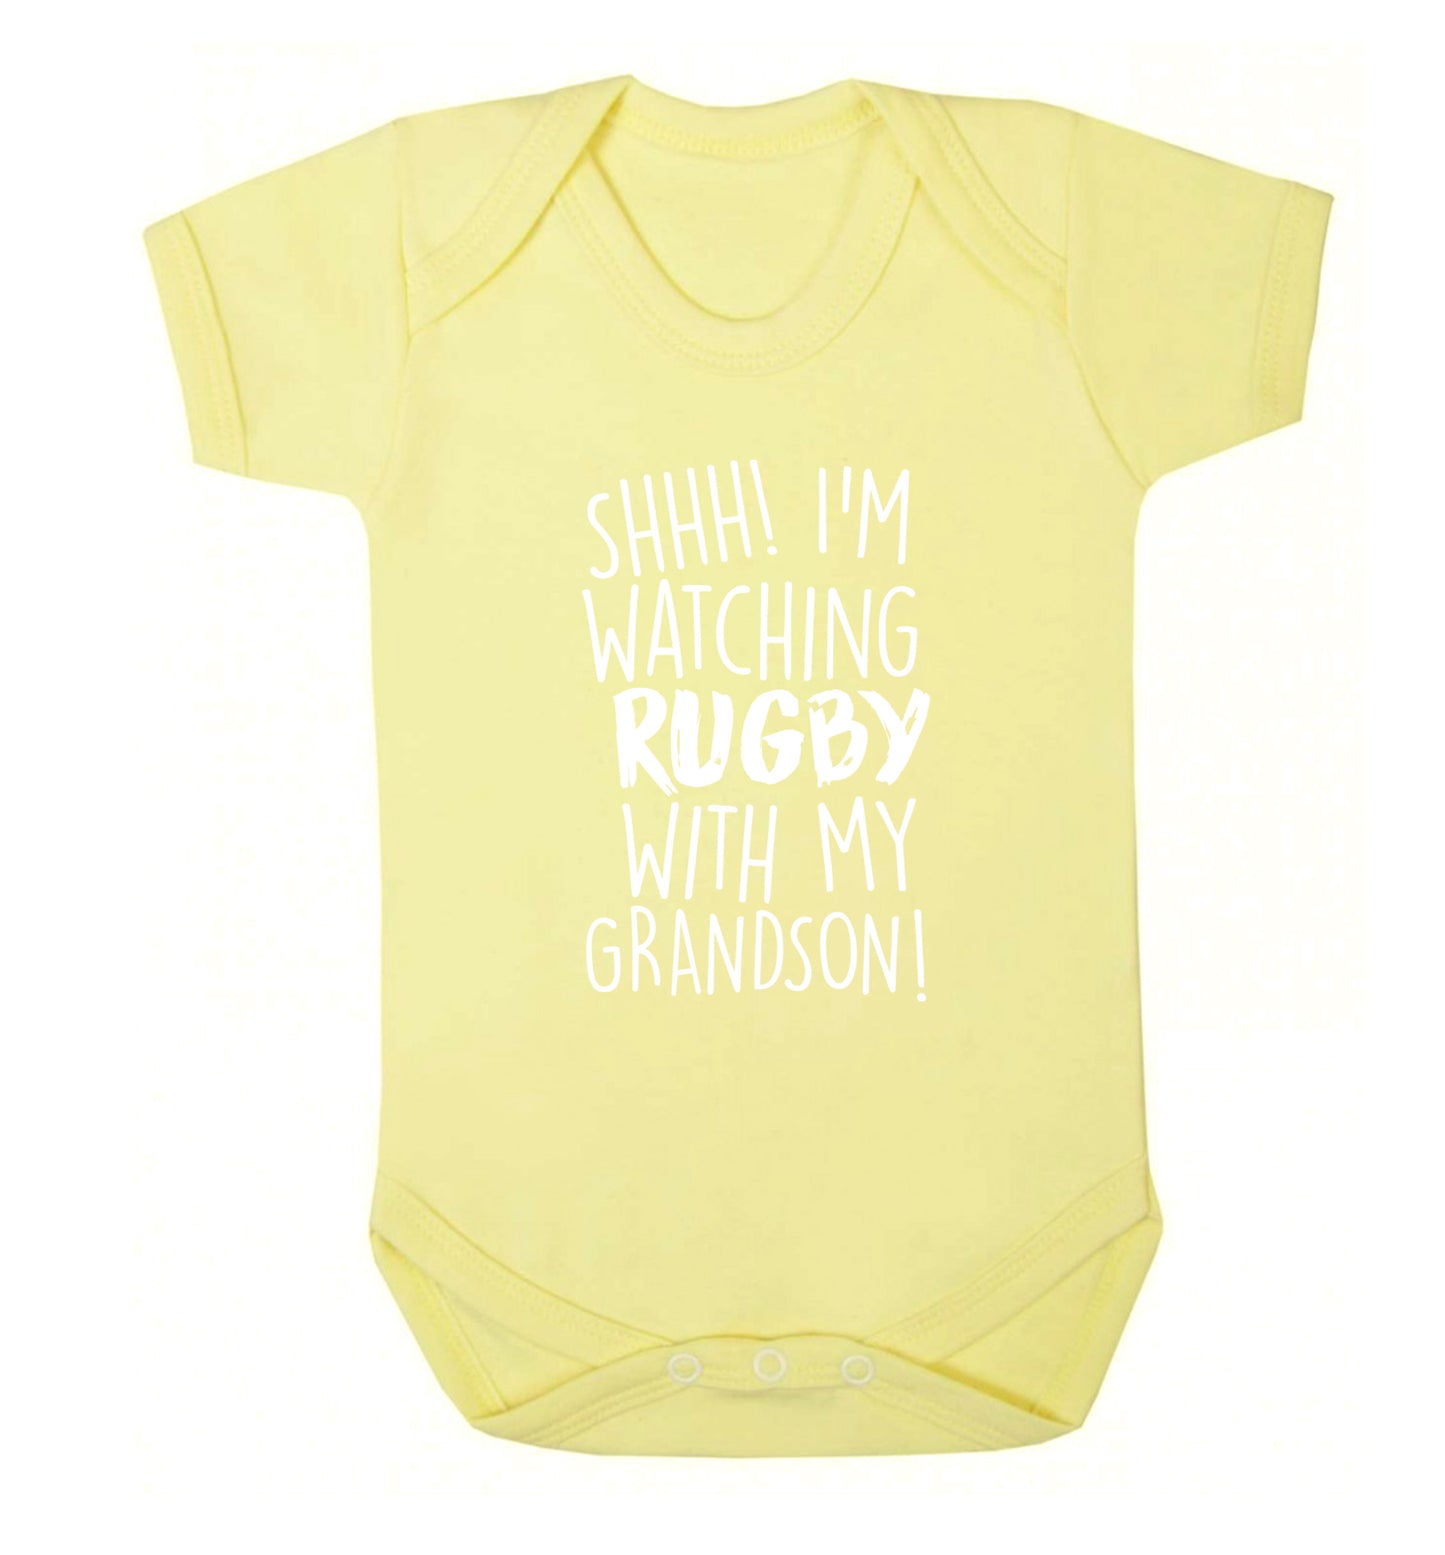 Shh I'm watching rugby with my grandson Baby Vest pale yellow 18-24 months